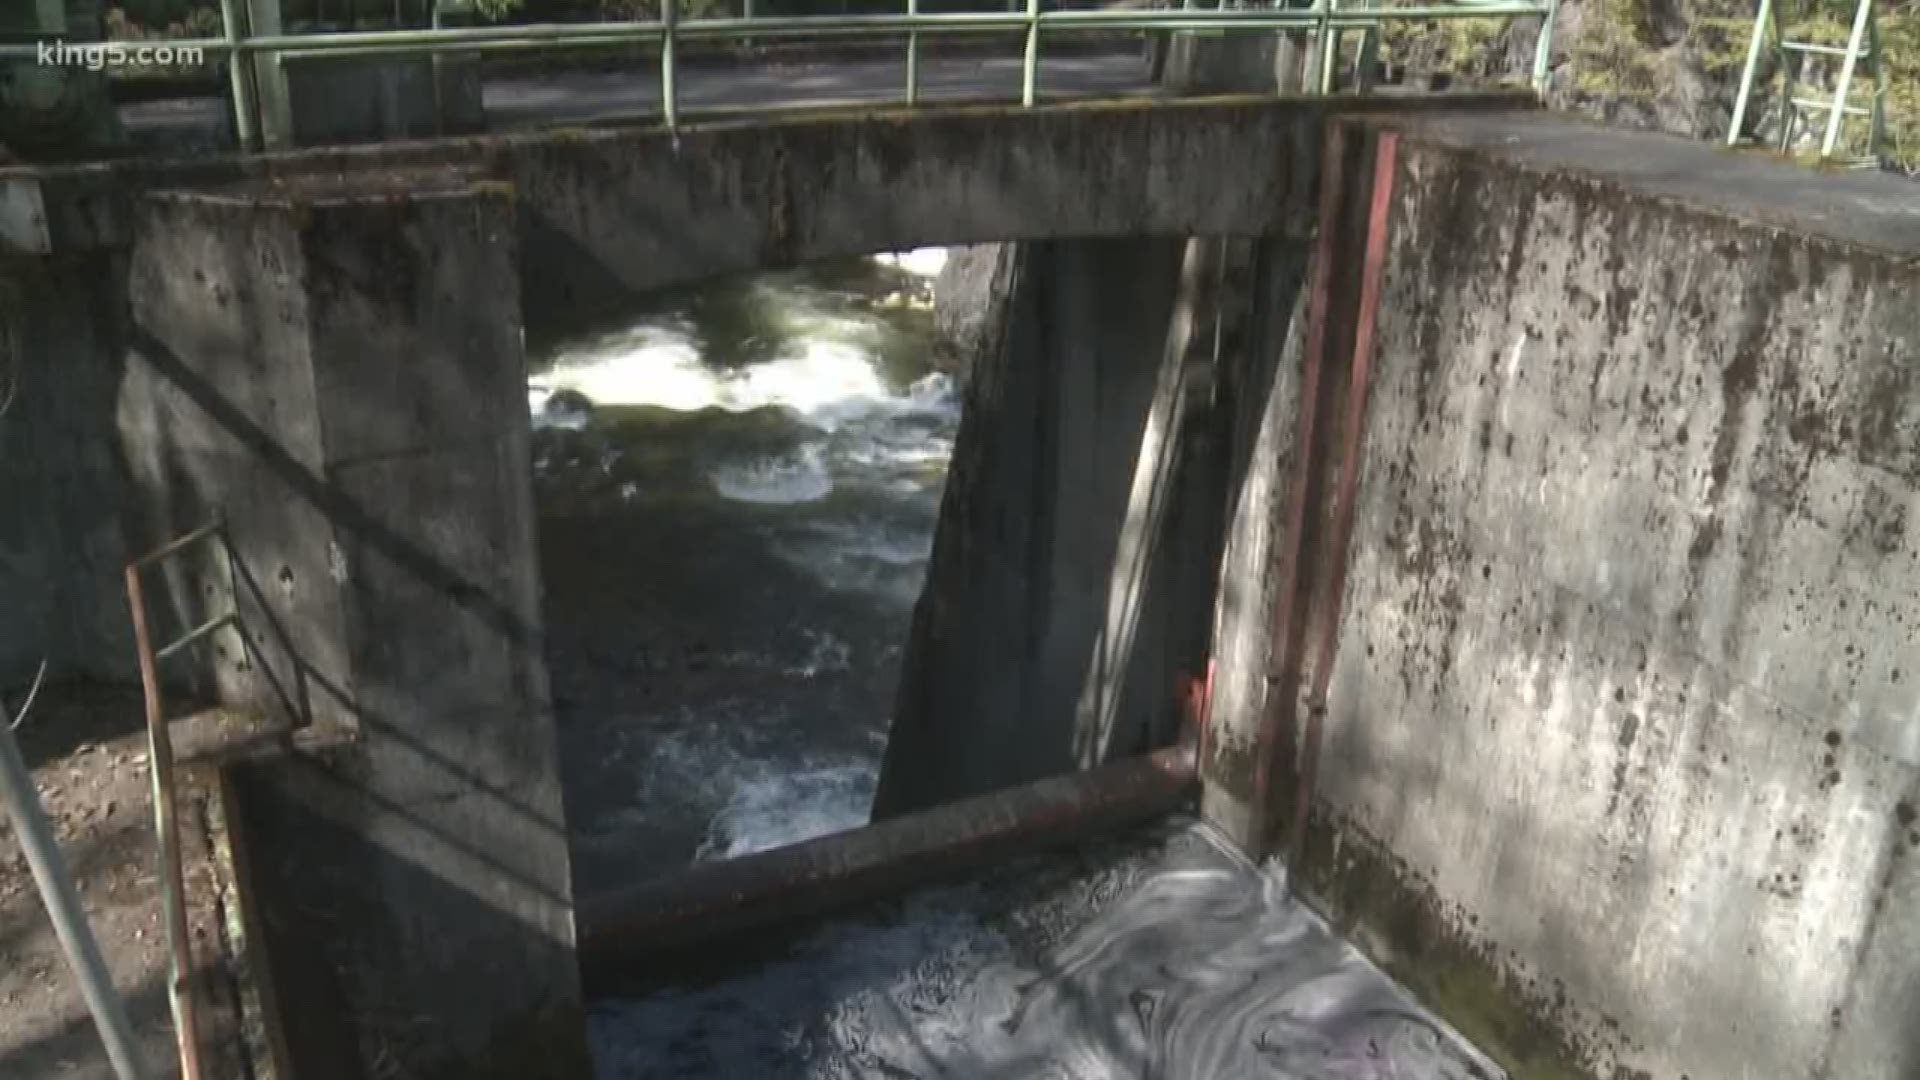 Hundreds of miles of river habitat are cut off to salmon because of dams and culverts around Western Washington. Fish passage is a main focus for those trying to produce more Chinook salmon, the food source for southern resident orcas. In her series "Saving the Orcas," KING 5 Environmental Reporter Alison Morrow looks at two projects to increase fish access to habitat on two important rivers.